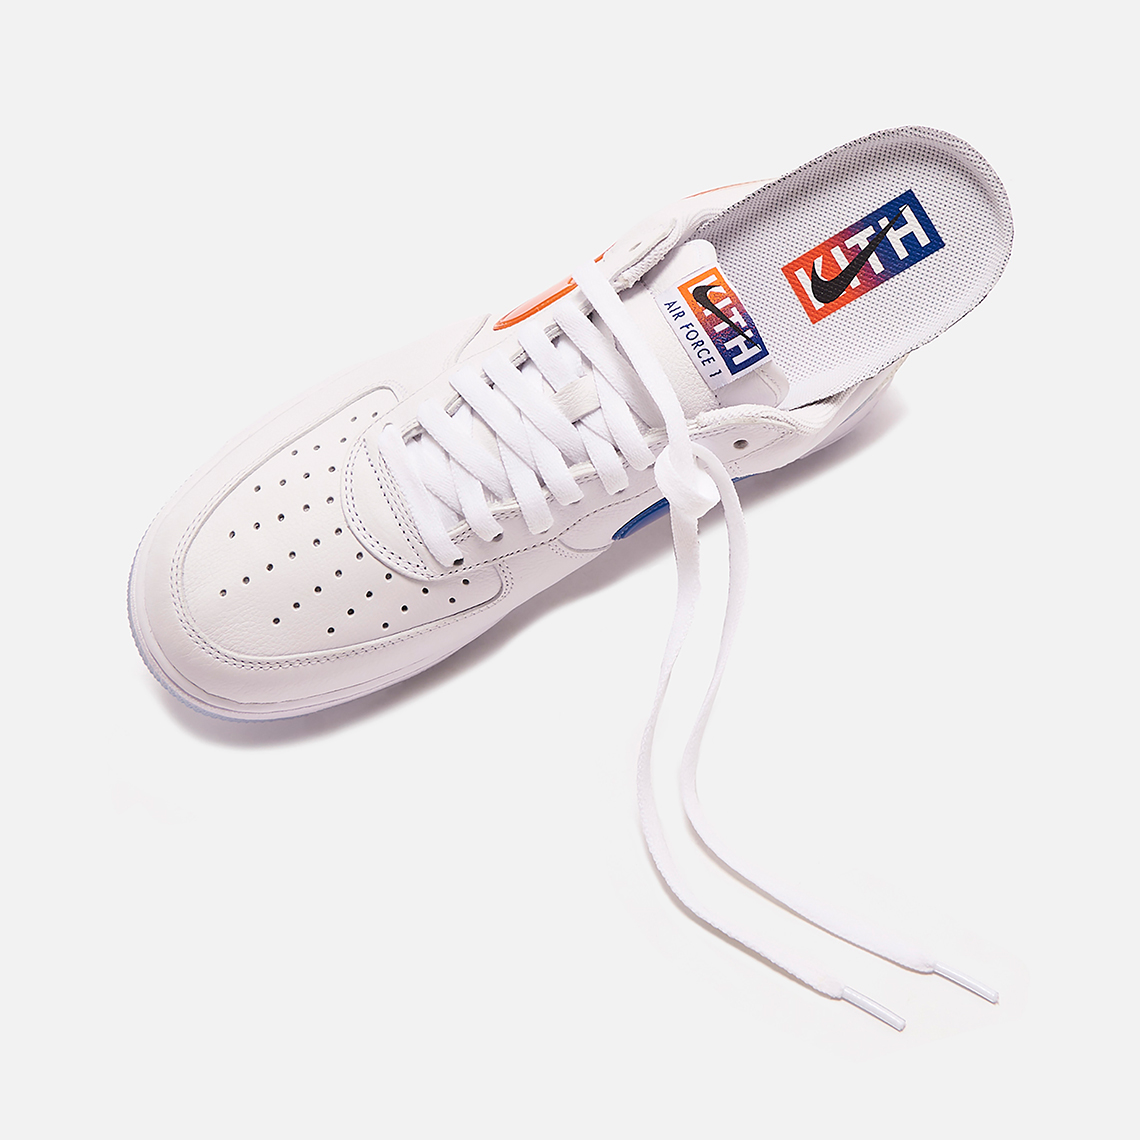 The KITH x Nike Air Force 1 Low NYC Surfaces In White